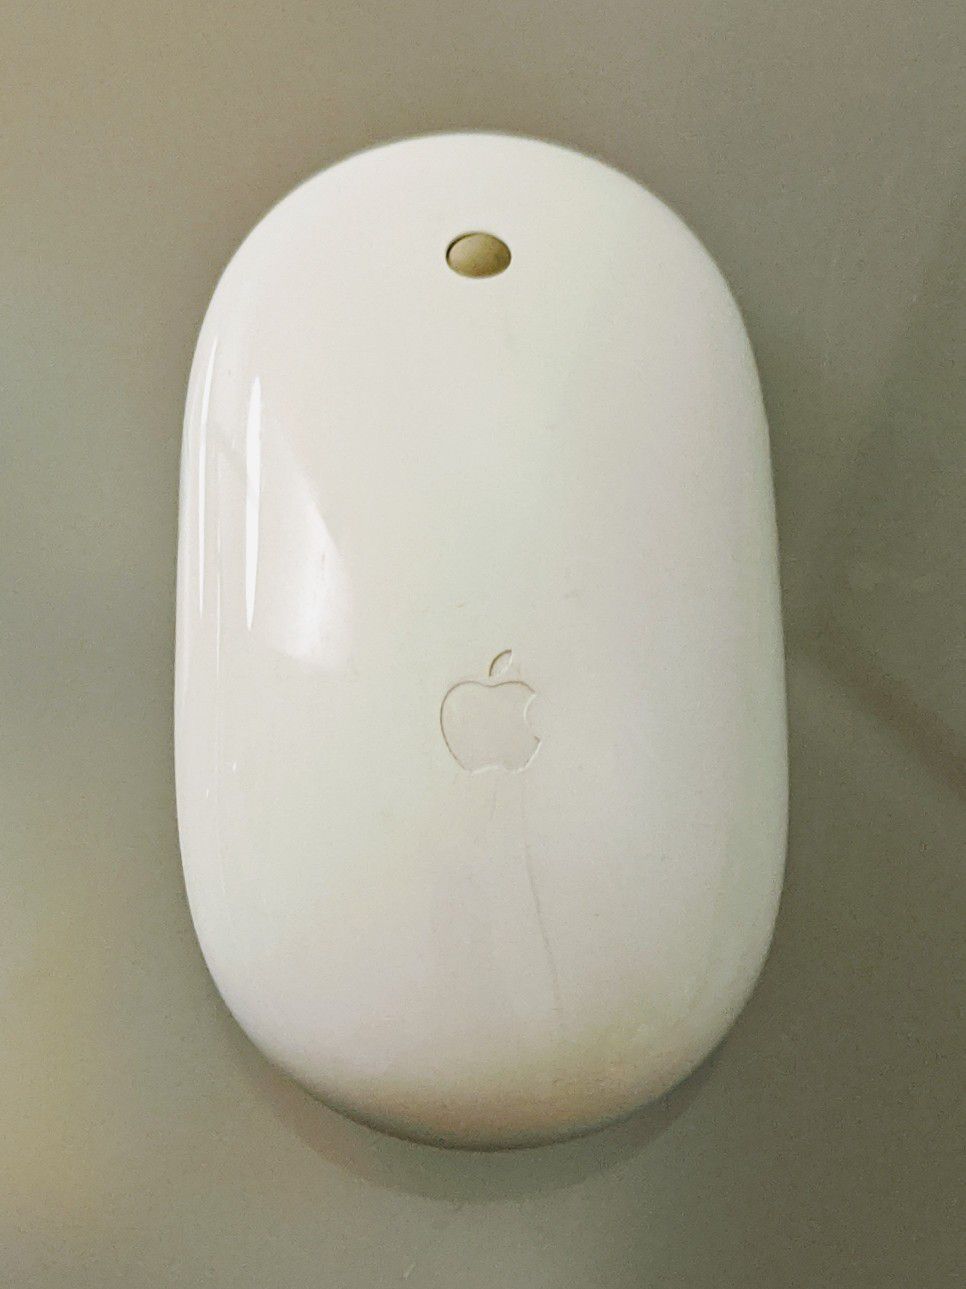 Apple Brand A1197 Mighty Mouse Bluetooth Wireless Optical Laser